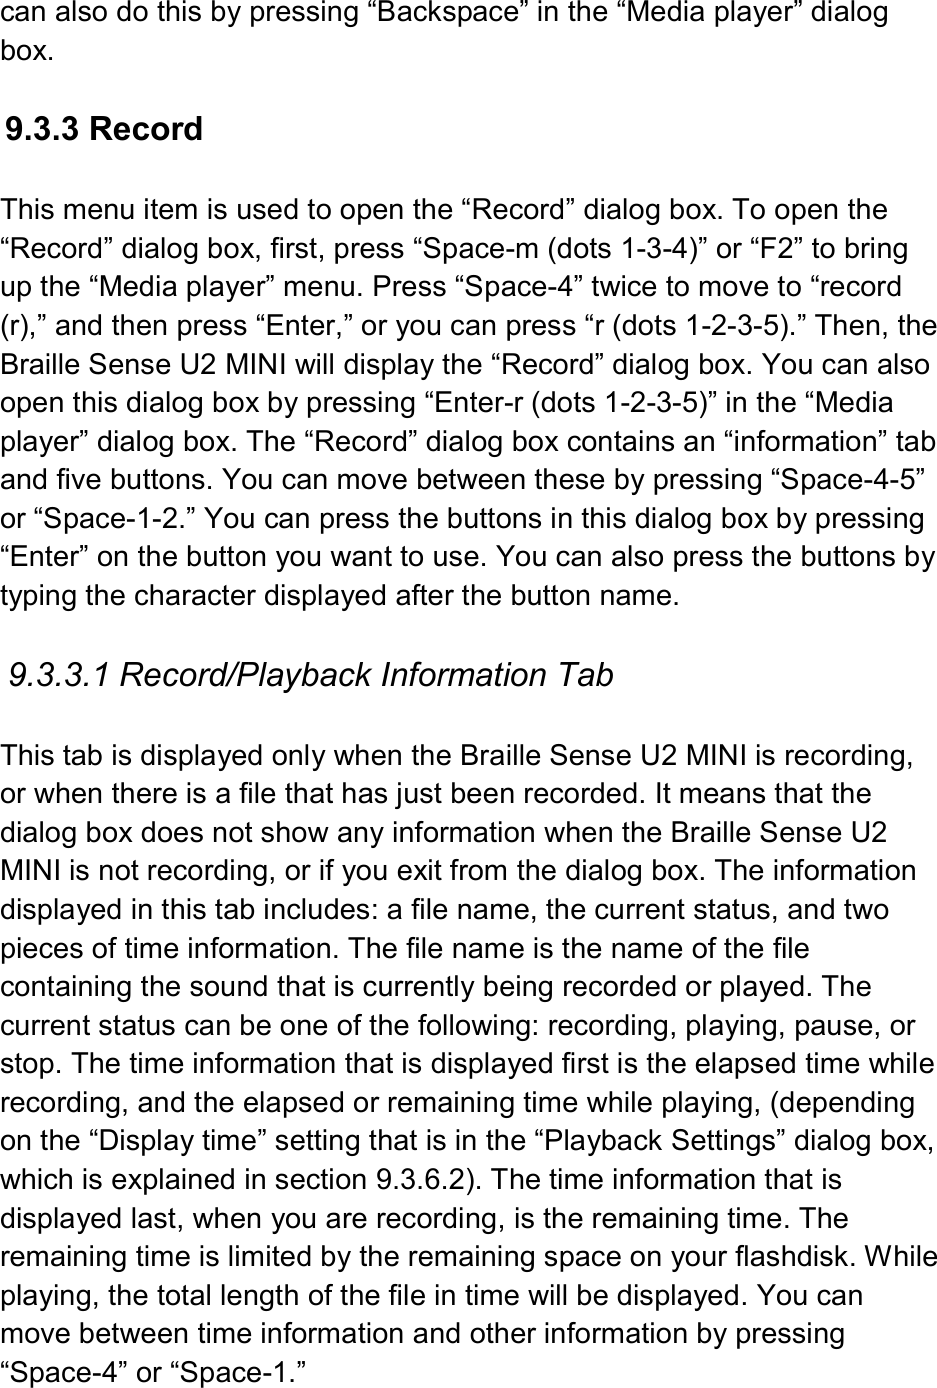  can also do this by pressing “Backspace” in the “Media player” dialog box.  9.3.3 Record  This menu item is used to open the “Record” dialog box. To open the “Record” dialog box, first, press “Space-m (dots 1-3-4)” or “F2” to bring up the “Media player” menu. Press “Space-4” twice to move to “record (r),” and then press “Enter,” or you can press “r (dots 1-2-3-5).” Then, the Braille Sense U2 MINI will display the “Record” dialog box. You can also open this dialog box by pressing “Enter-r (dots 1-2-3-5)” in the “Media player” dialog box. The “Record” dialog box contains an “information” tab and five buttons. You can move between these by pressing “Space-4-5” or “Space-1-2.” You can press the buttons in this dialog box by pressing “Enter” on the button you want to use. You can also press the buttons by typing the character displayed after the button name.  9.3.3.1 Record/Playback Information Tab  This tab is displayed only when the Braille Sense U2 MINI is recording, or when there is a file that has just been recorded. It means that the dialog box does not show any information when the Braille Sense U2 MINI is not recording, or if you exit from the dialog box. The information displayed in this tab includes: a file name, the current status, and two pieces of time information. The file name is the name of the file containing the sound that is currently being recorded or played. The current status can be one of the following: recording, playing, pause, or stop. The time information that is displayed first is the elapsed time while recording, and the elapsed or remaining time while playing, (depending on the “Display time” setting that is in the “Playback Settings” dialog box, which is explained in section 9.3.6.2). The time information that is displayed last, when you are recording, is the remaining time. The remaining time is limited by the remaining space on your flashdisk. While playing, the total length of the file in time will be displayed. You can move between time information and other information by pressing “Space-4” or “Space-1.” 